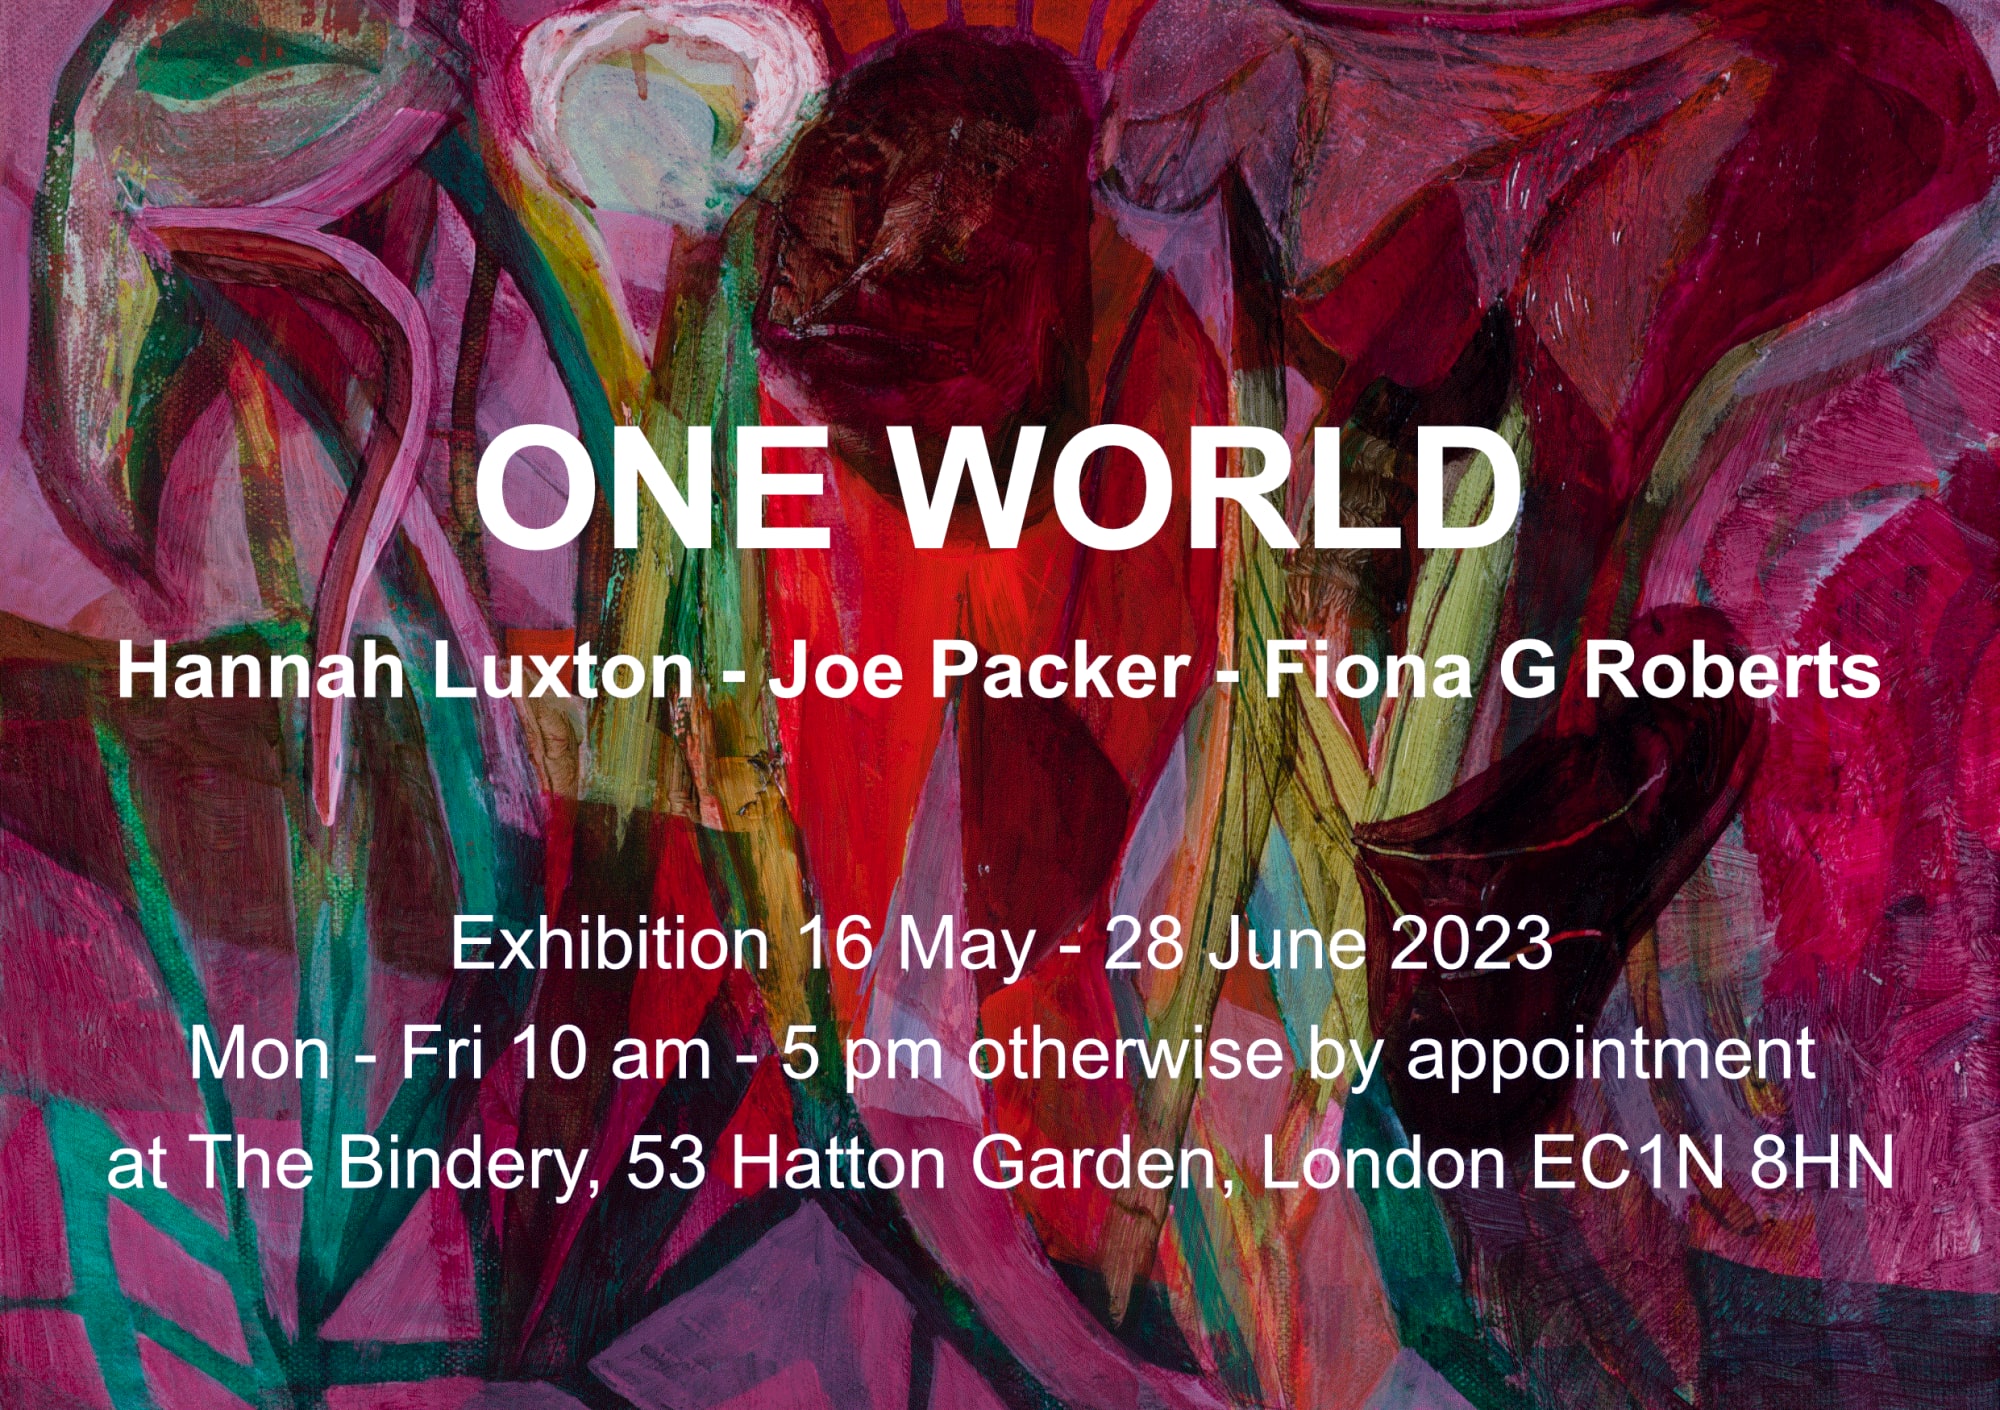 ONE WORLD: Exhibition curated by Paul Carey-Kent and Vivienne Roberts, at The Bindery, EC1N 8HN